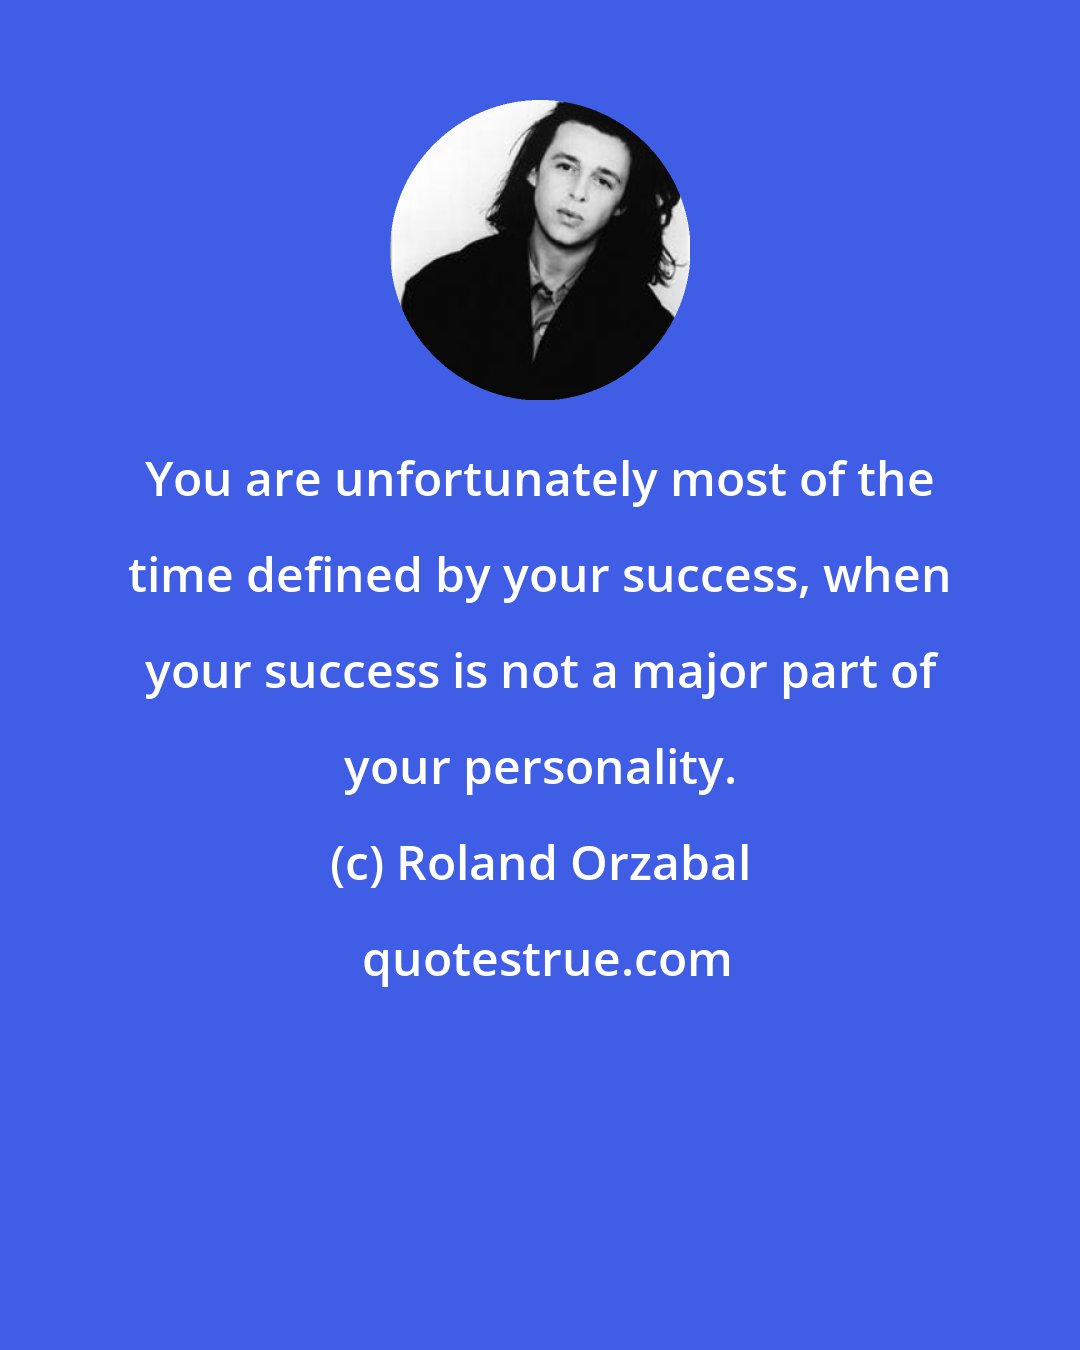 Roland Orzabal: You are unfortunately most of the time defined by your success, when your success is not a major part of your personality.